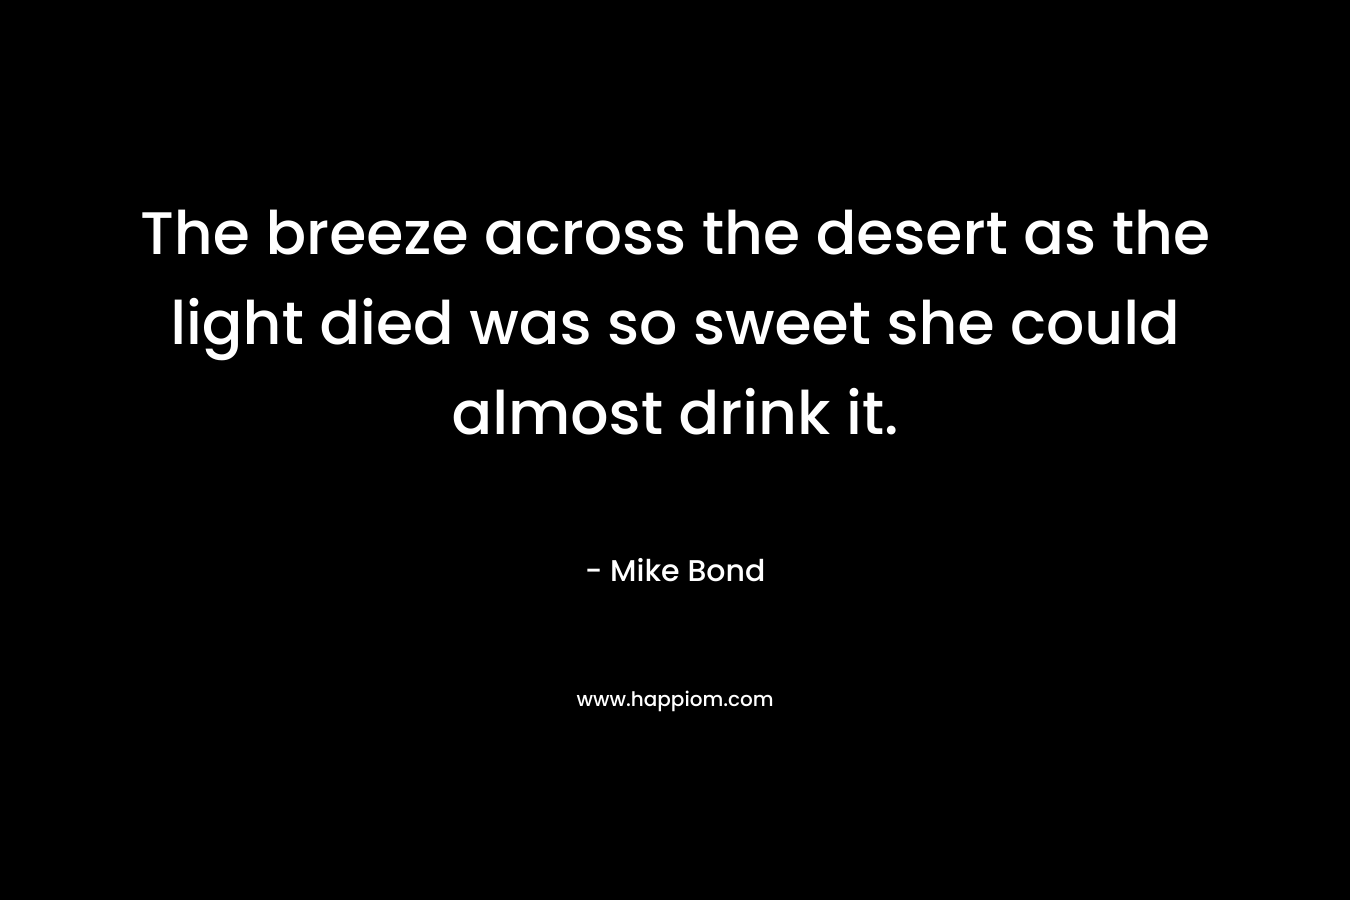 The breeze across the desert as the light died was so sweet she could almost drink it. – Mike Bond